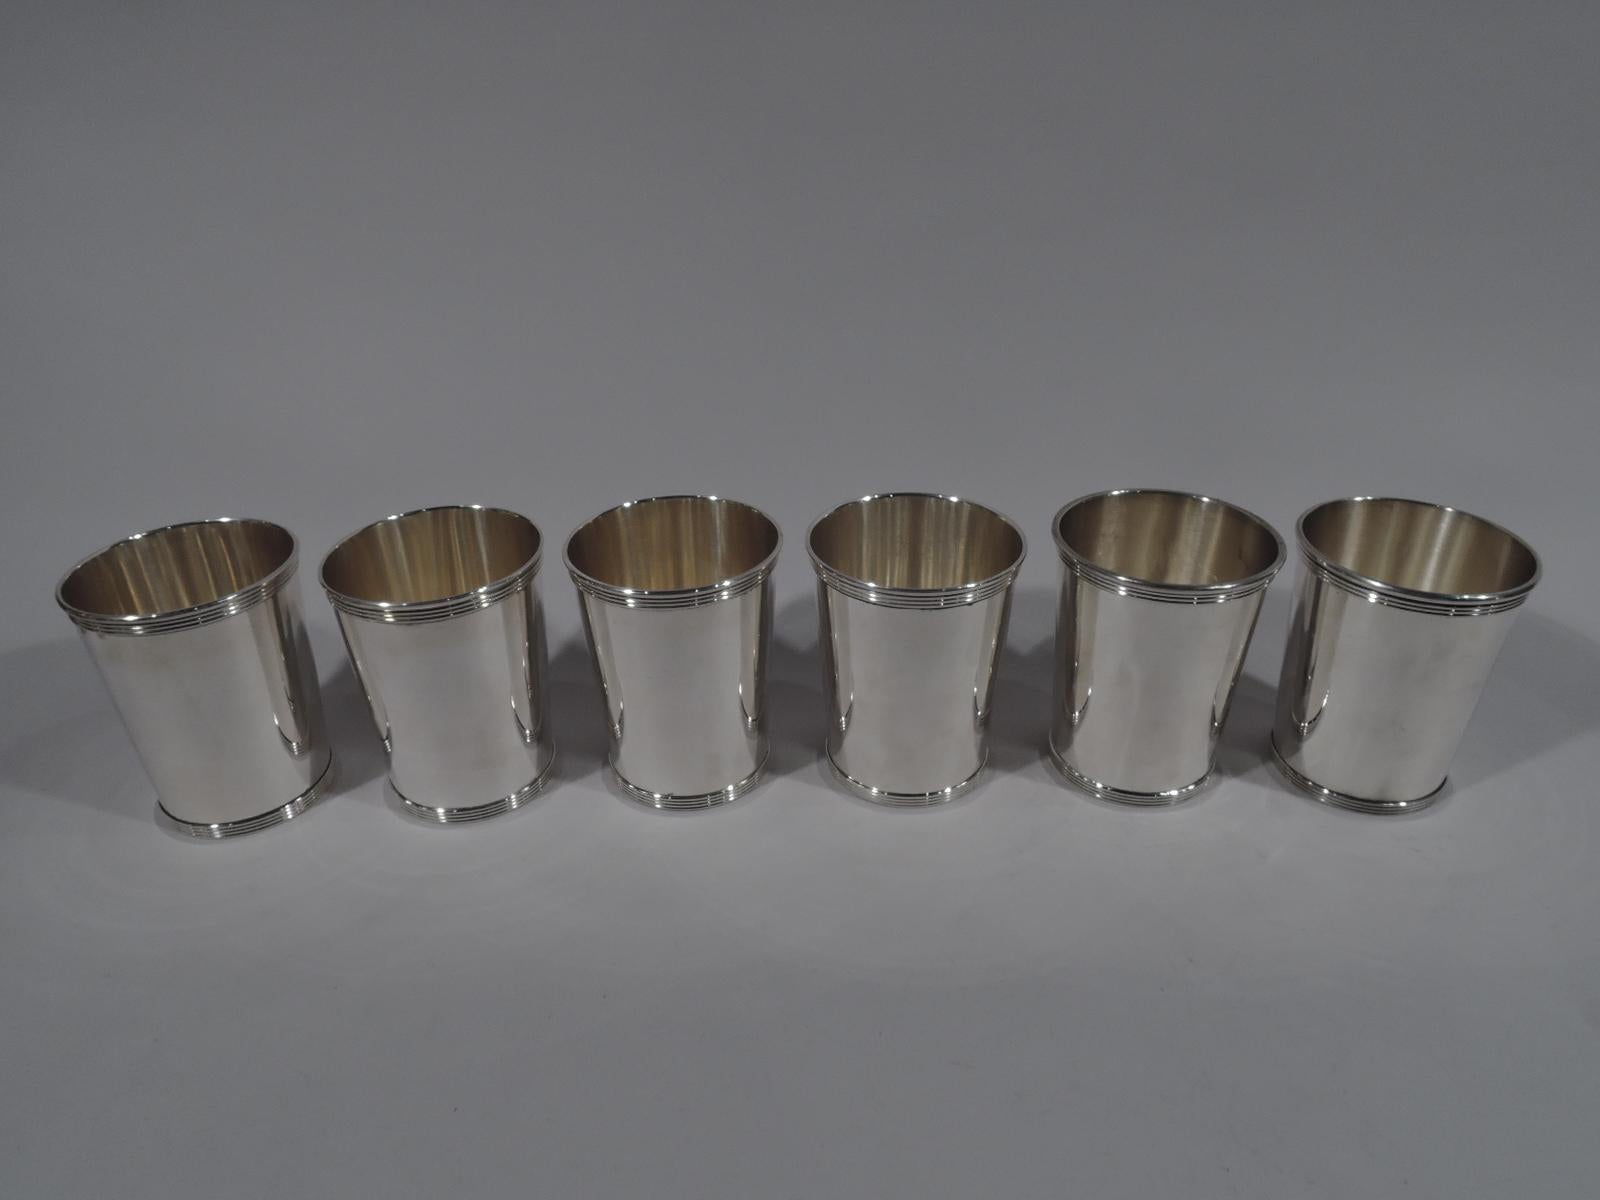 Set of 6 sterling silver mint julep cups. Made by Alvin in Providence. Each: Straight and tapering sides. Reeded rim and foot. A great starter set. Fully marked and numbered S251. Total weight: 22 troy ounces.